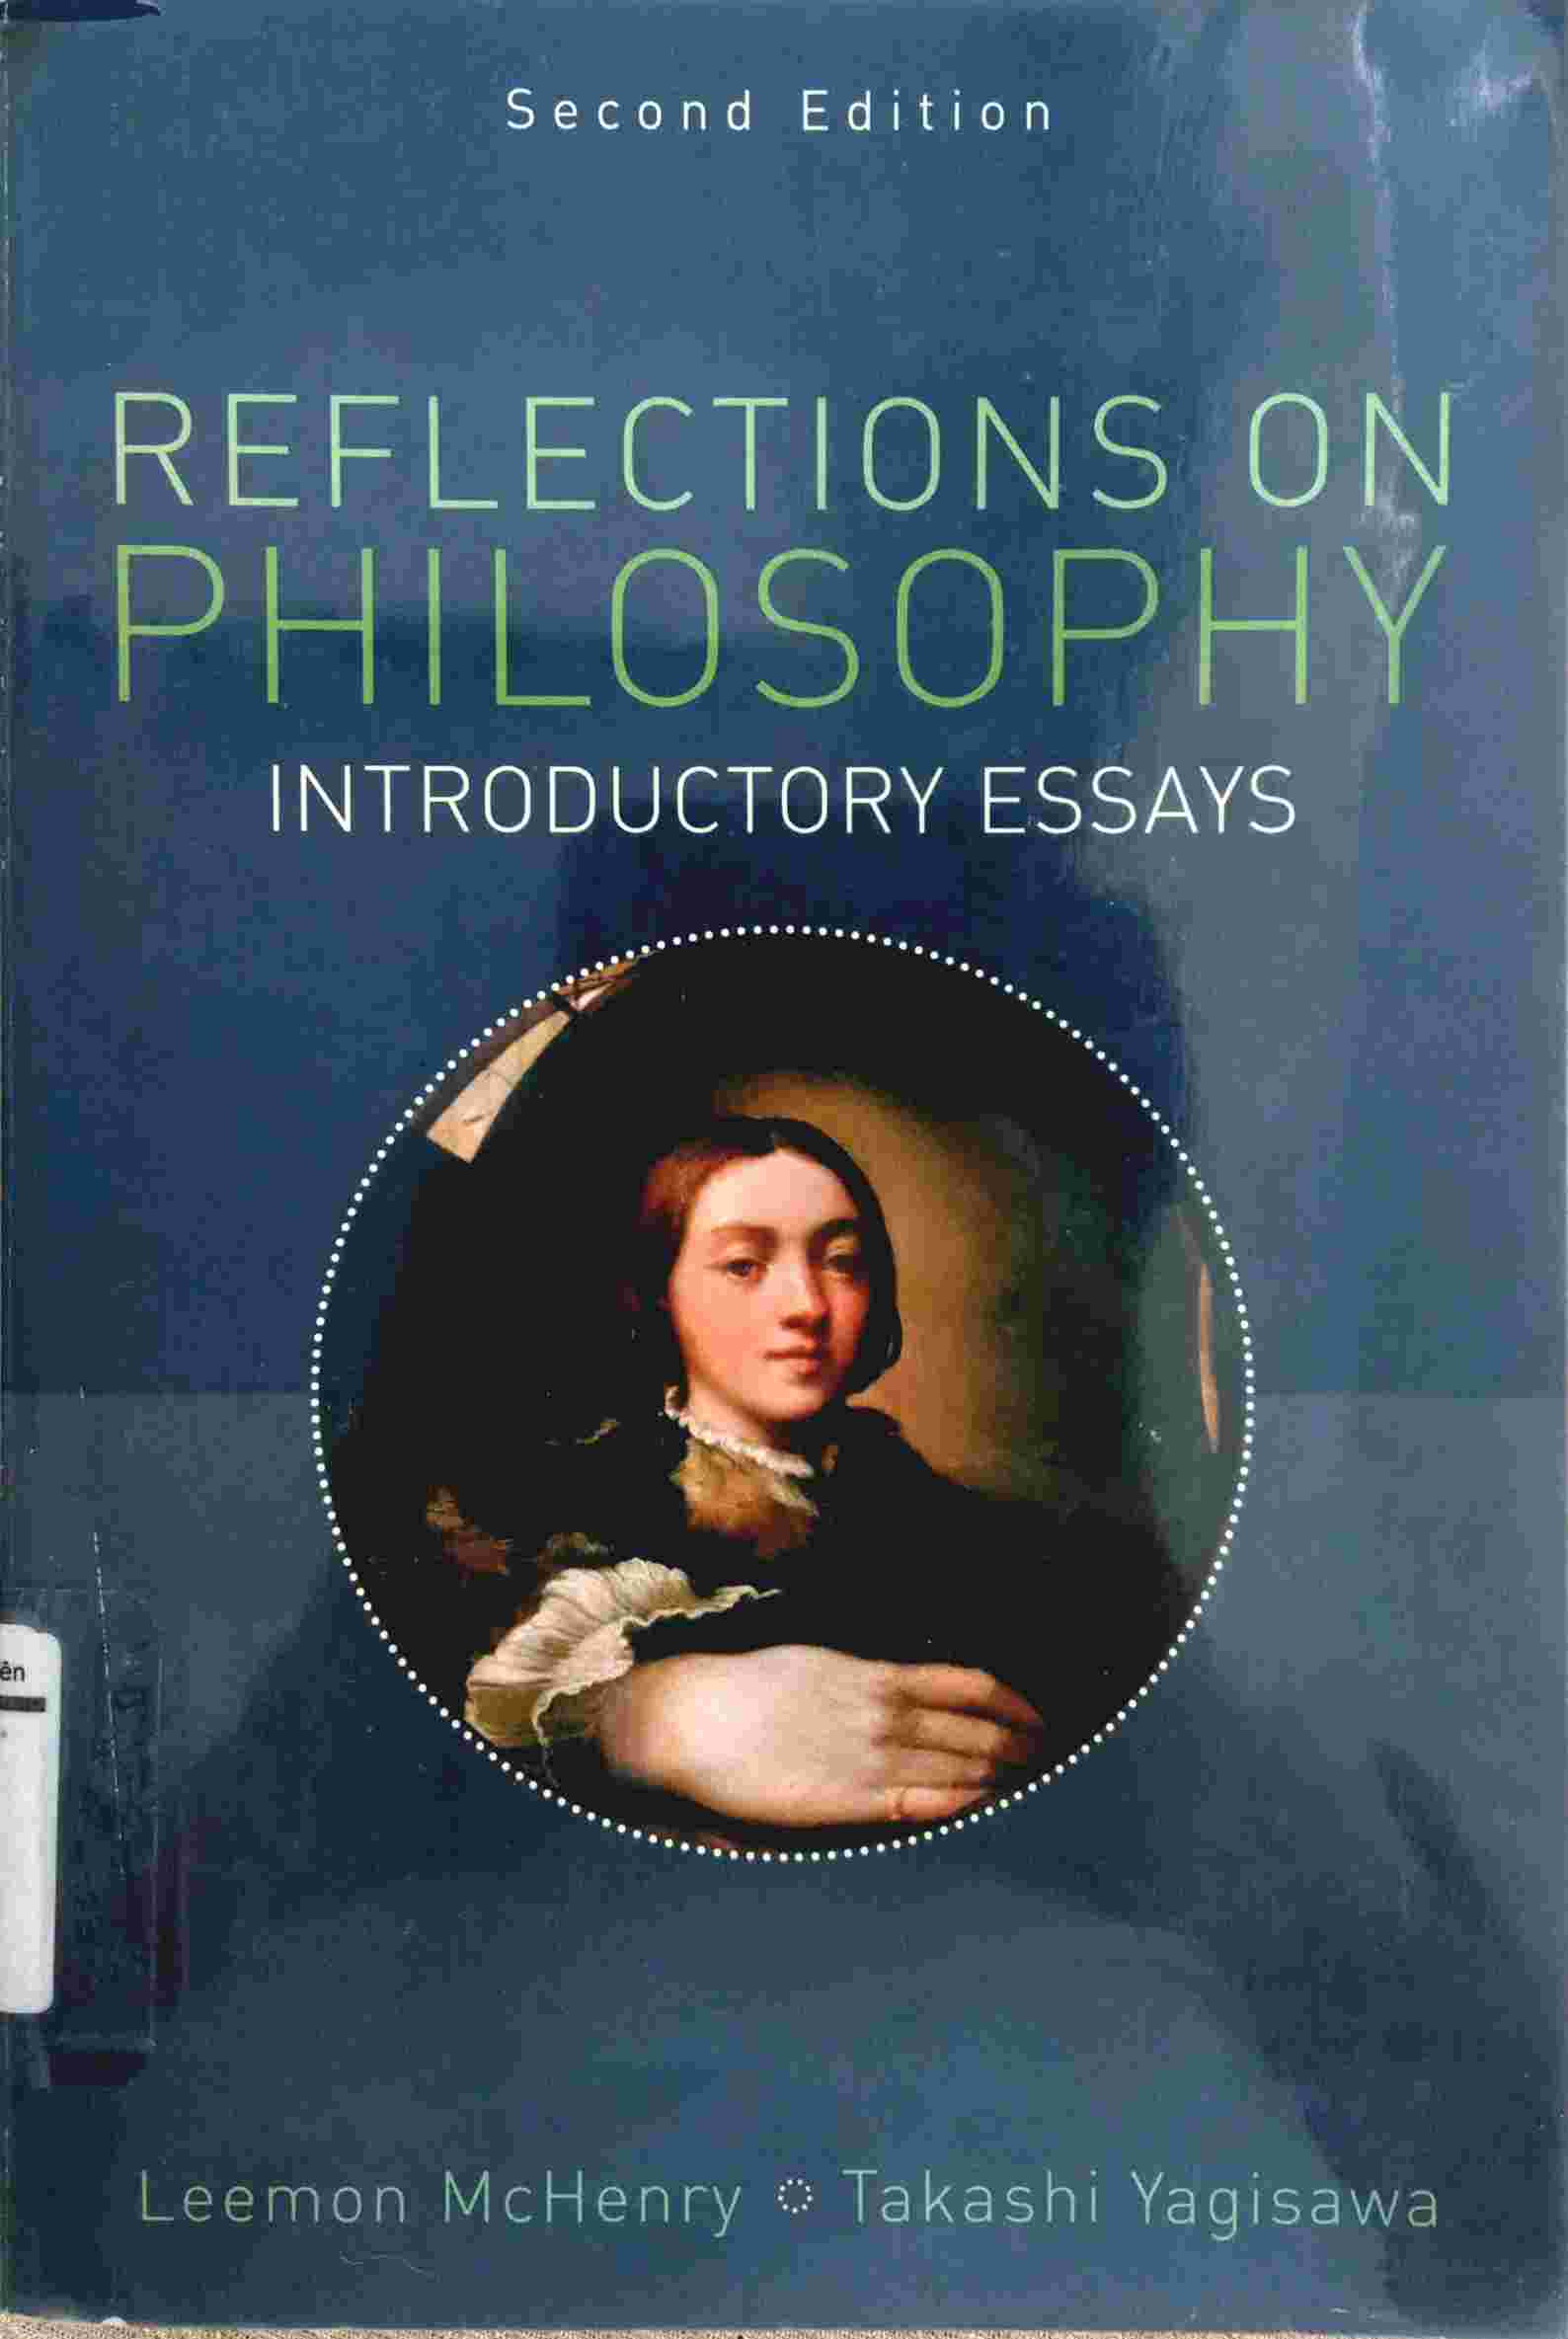 REFLECTIONS ON PHILOSOPHY